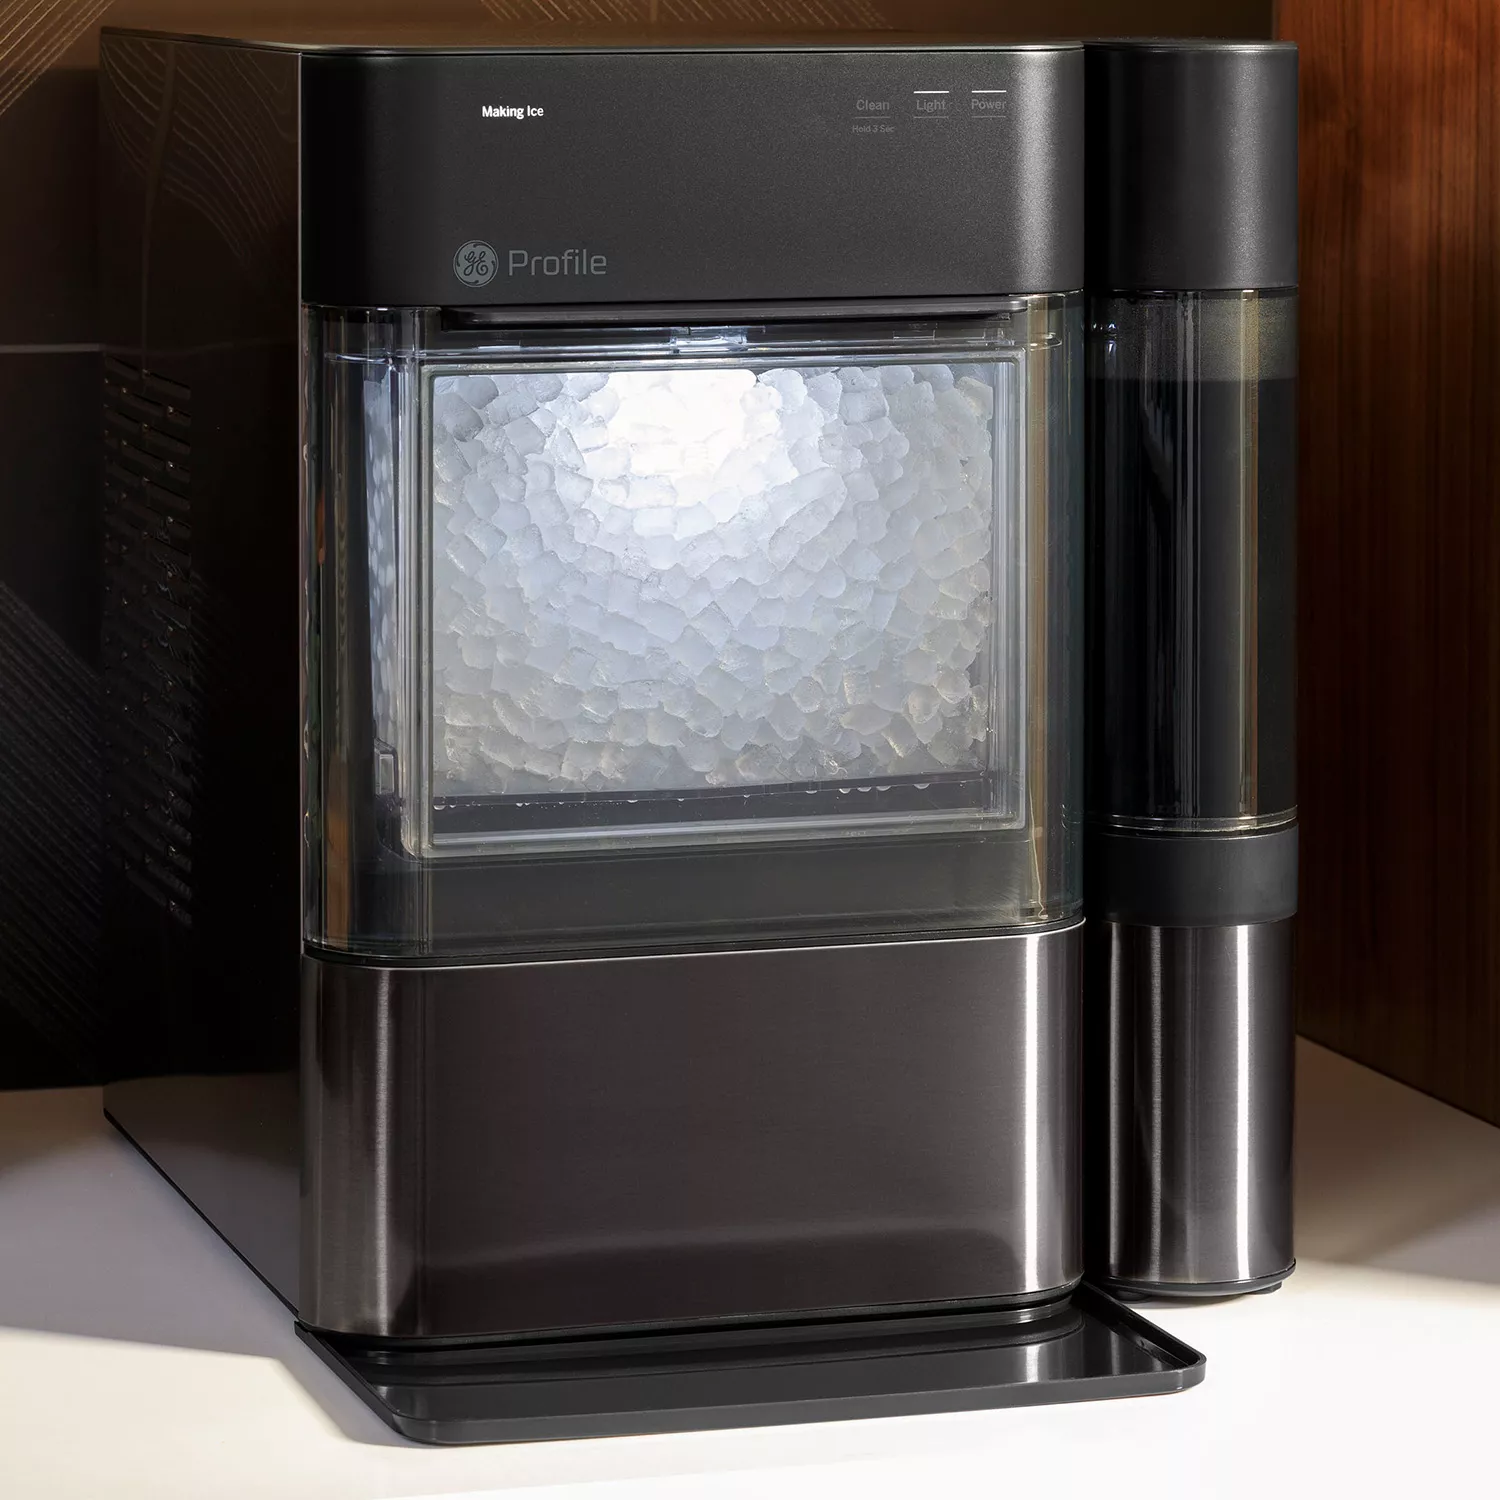 GE Profile Opal 2.0 Nugget Ice Maker - Stainless Steel